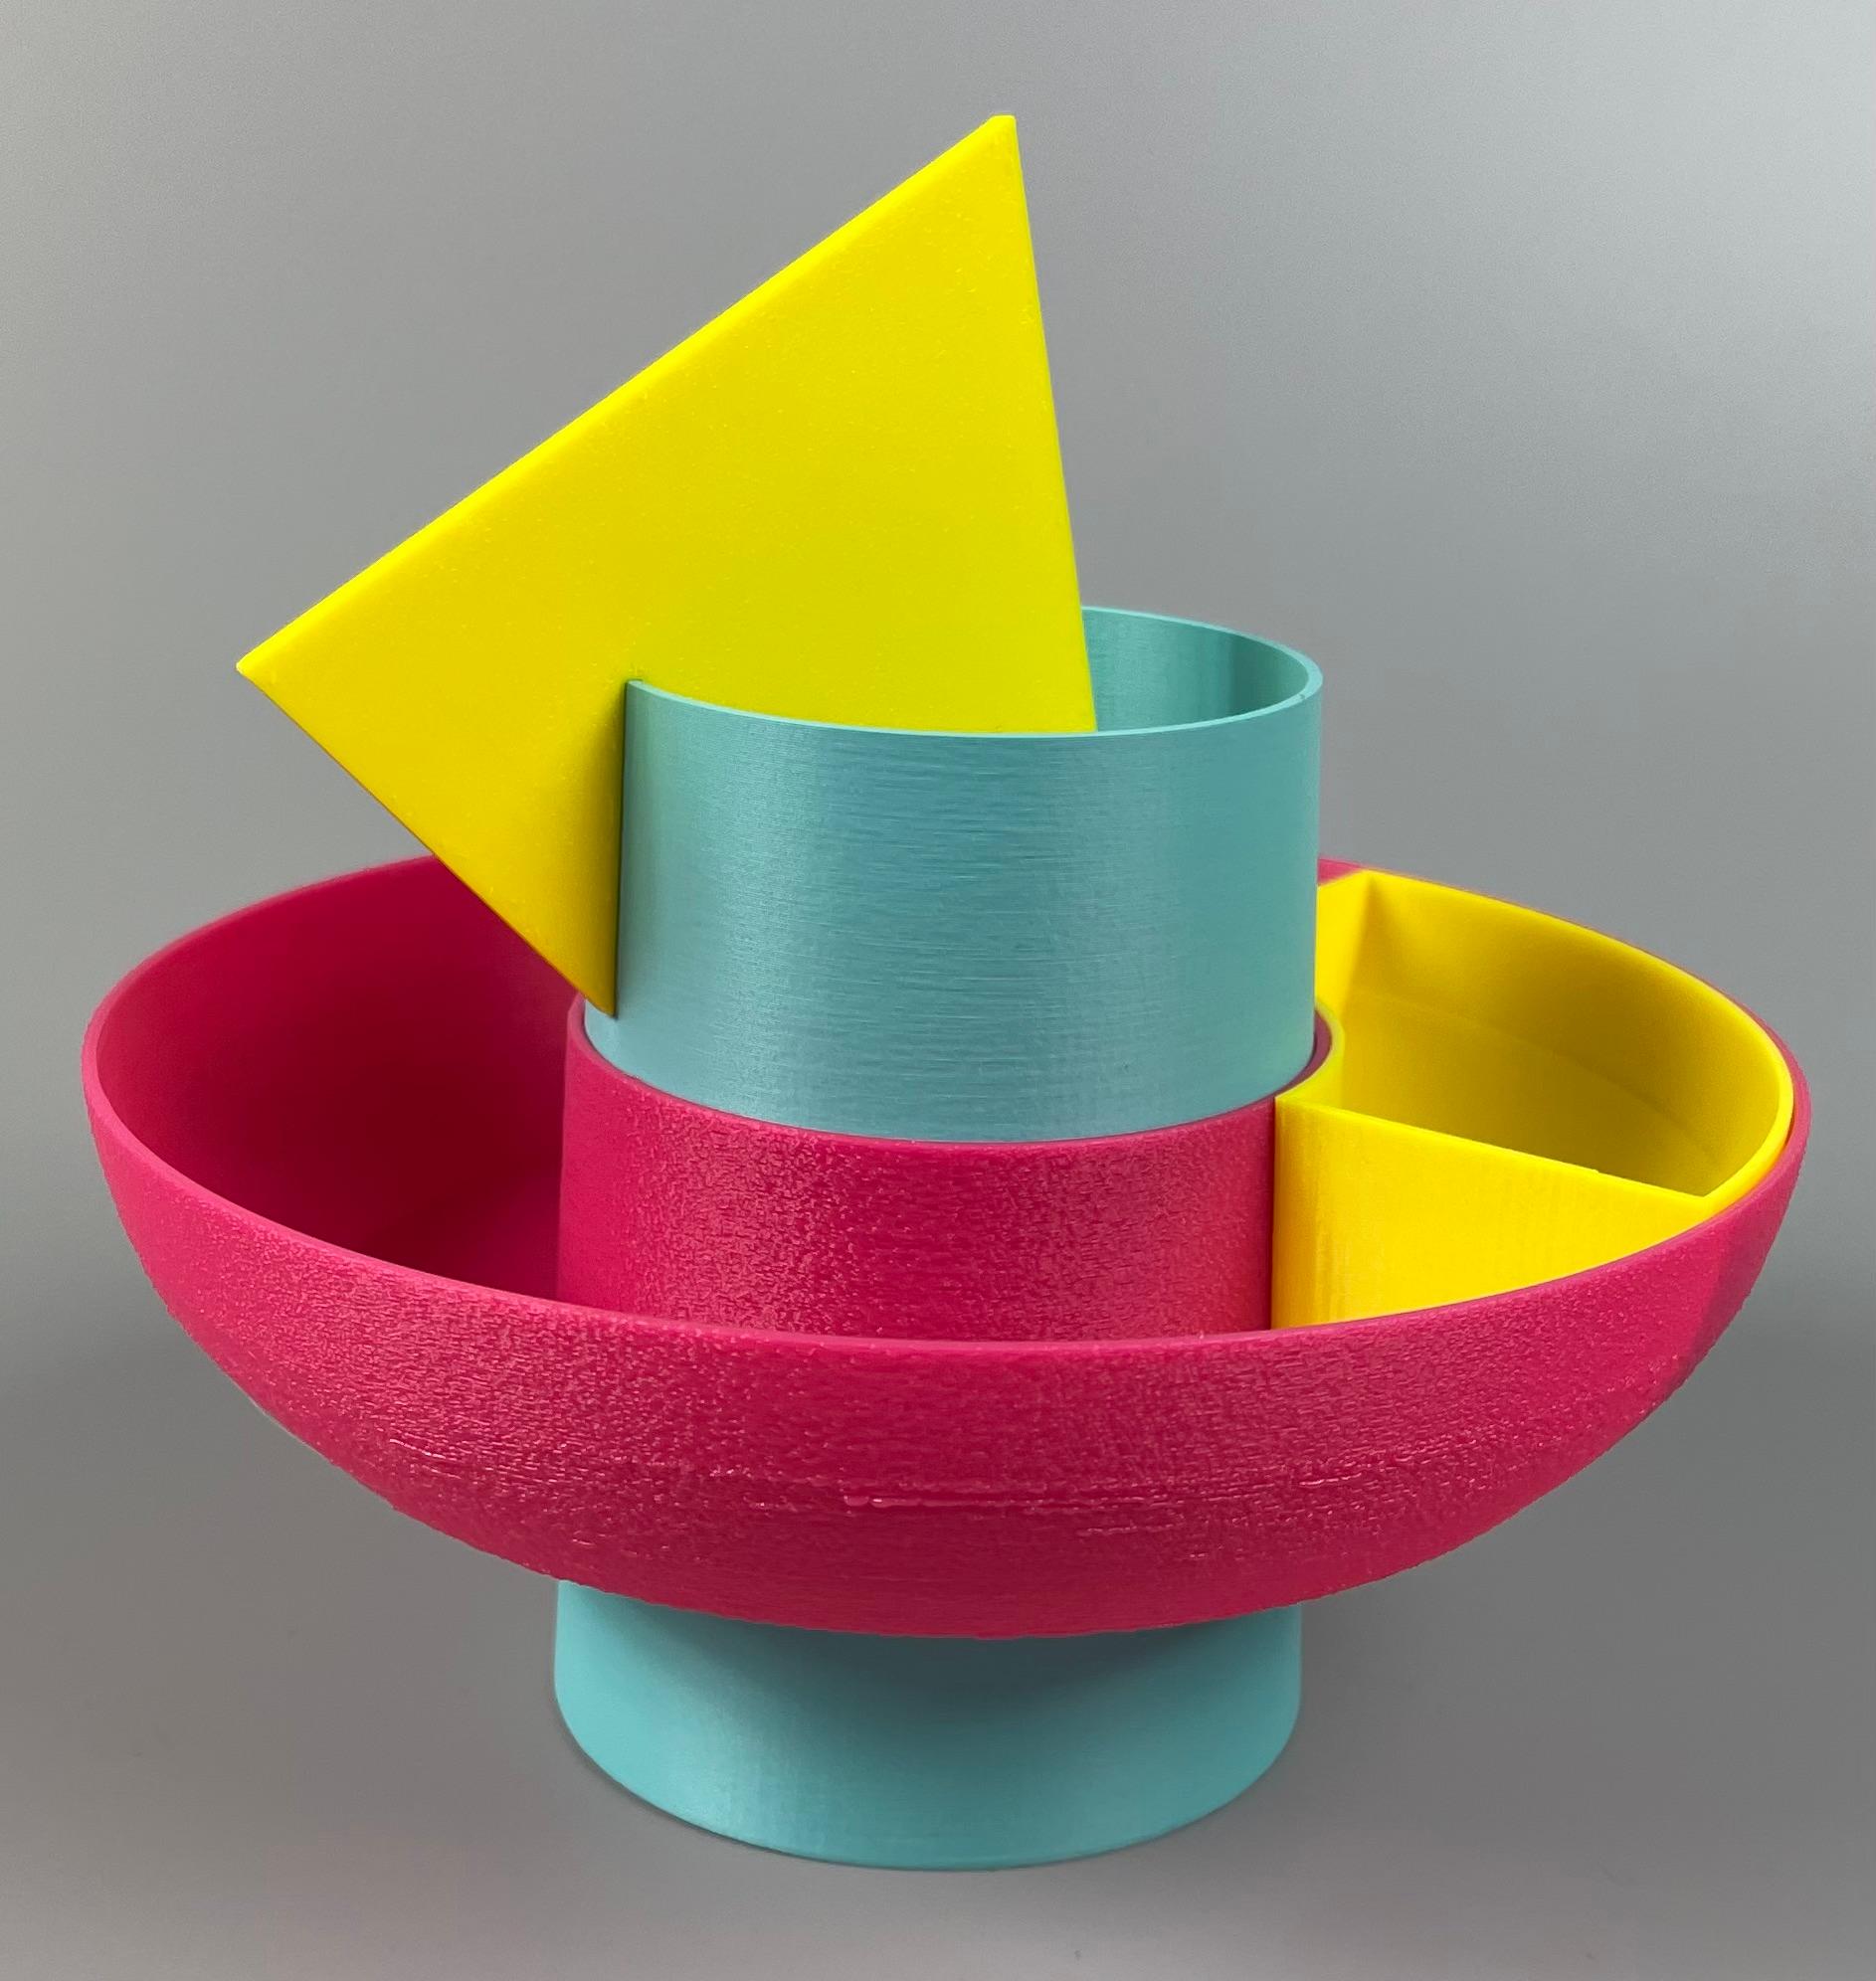 90's Inspired Desk Organizer - Printed in PolyTerra Teal PLA, GST3D Pink PLA, and Hatchbox Yellow PLA.  - 3d model